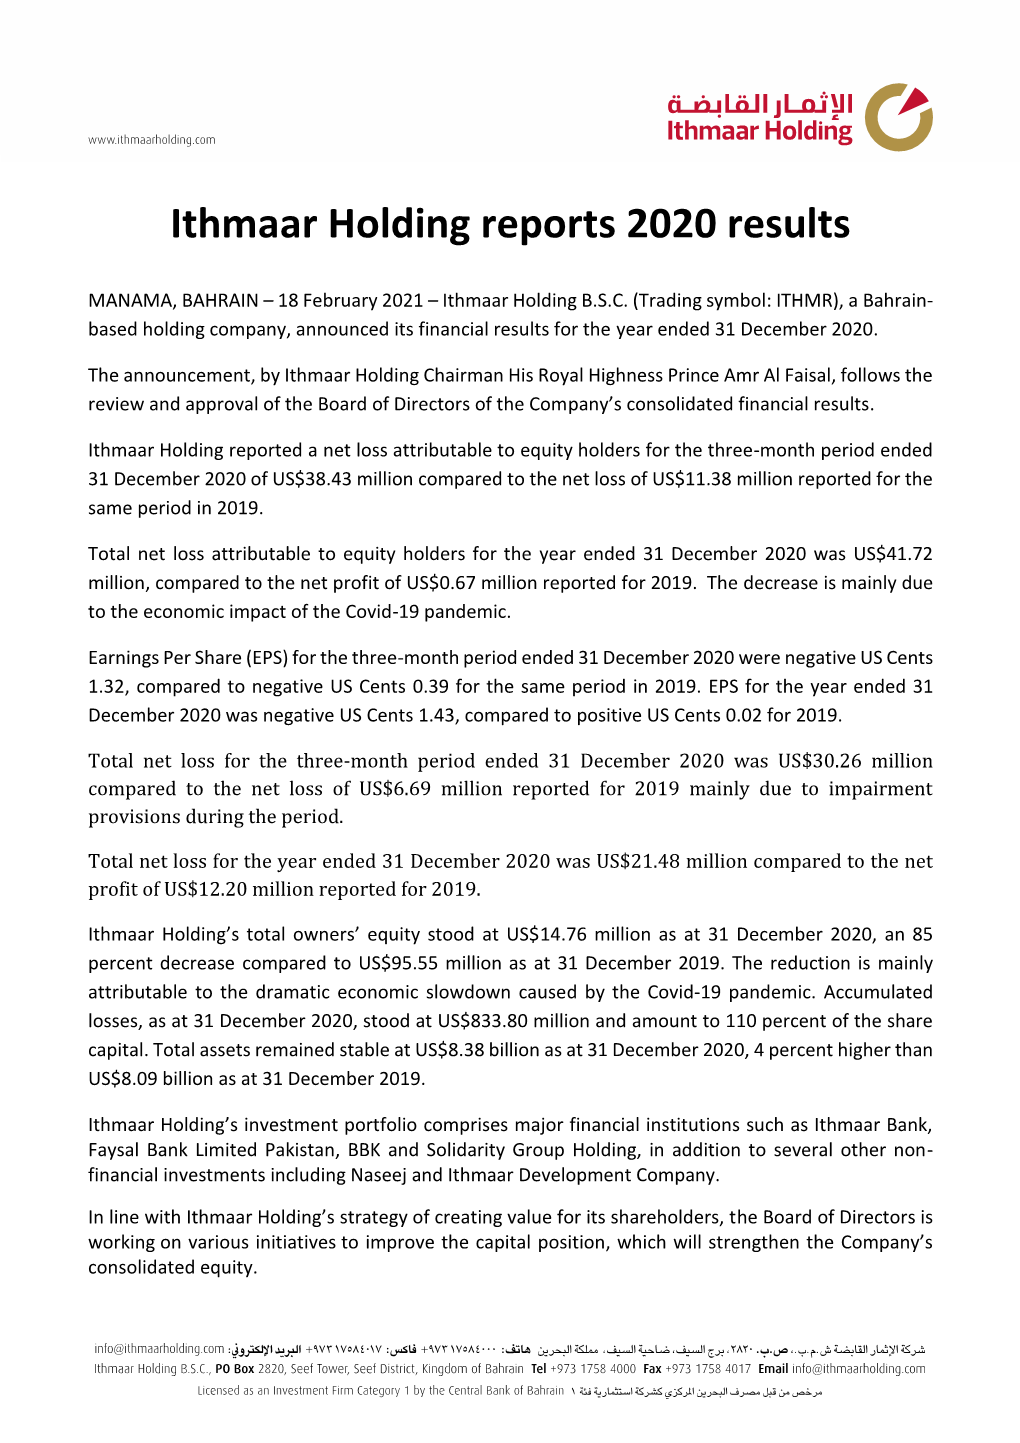 Ithmaar Holding Reports 2020 Results